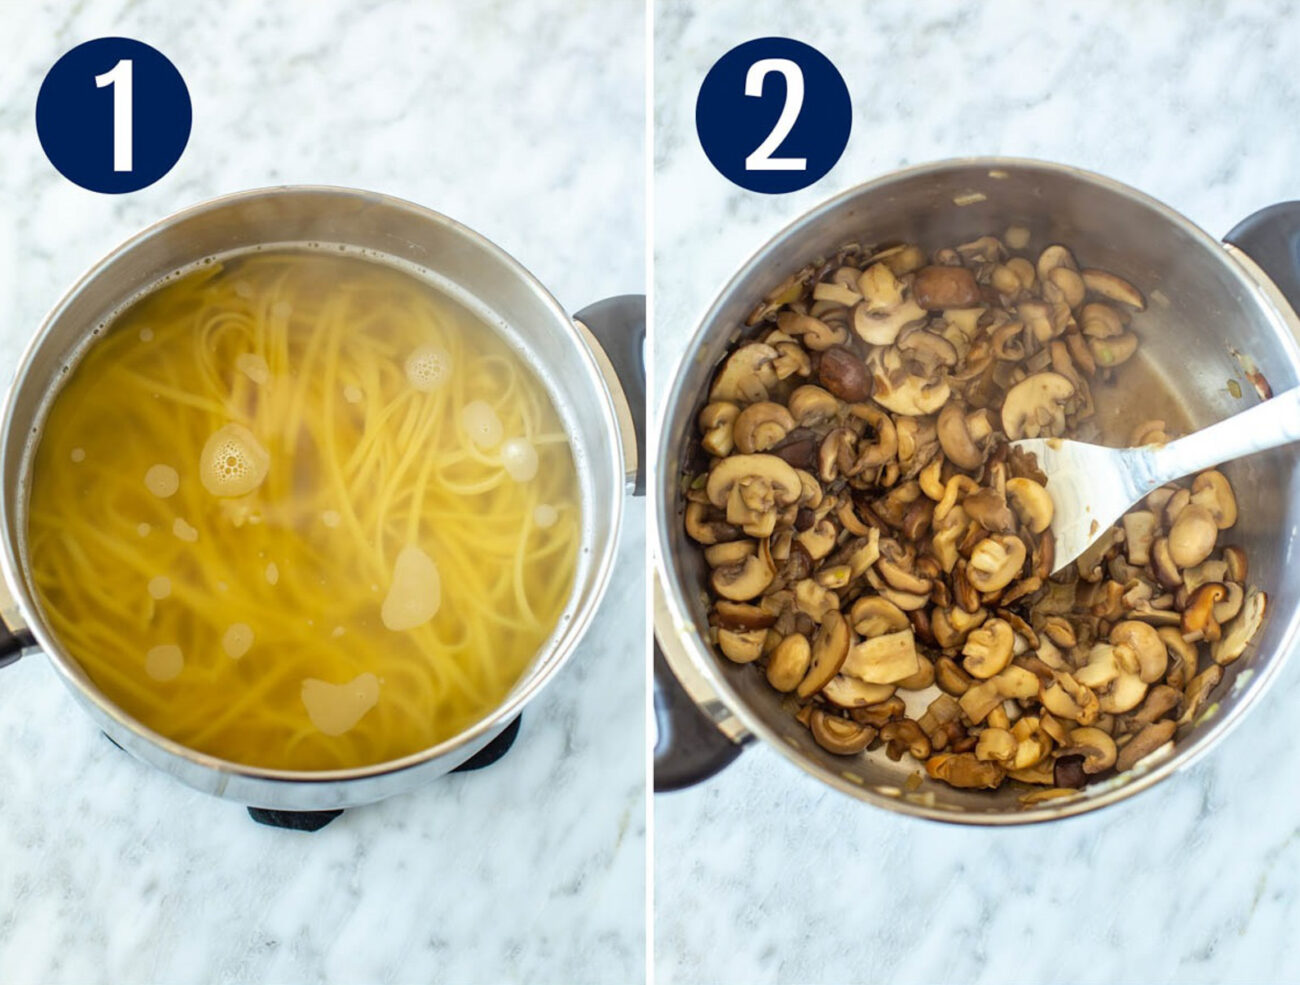 Steps 1 and 2 for making mushroom pasta: Boil pasta and cook mushrooms.